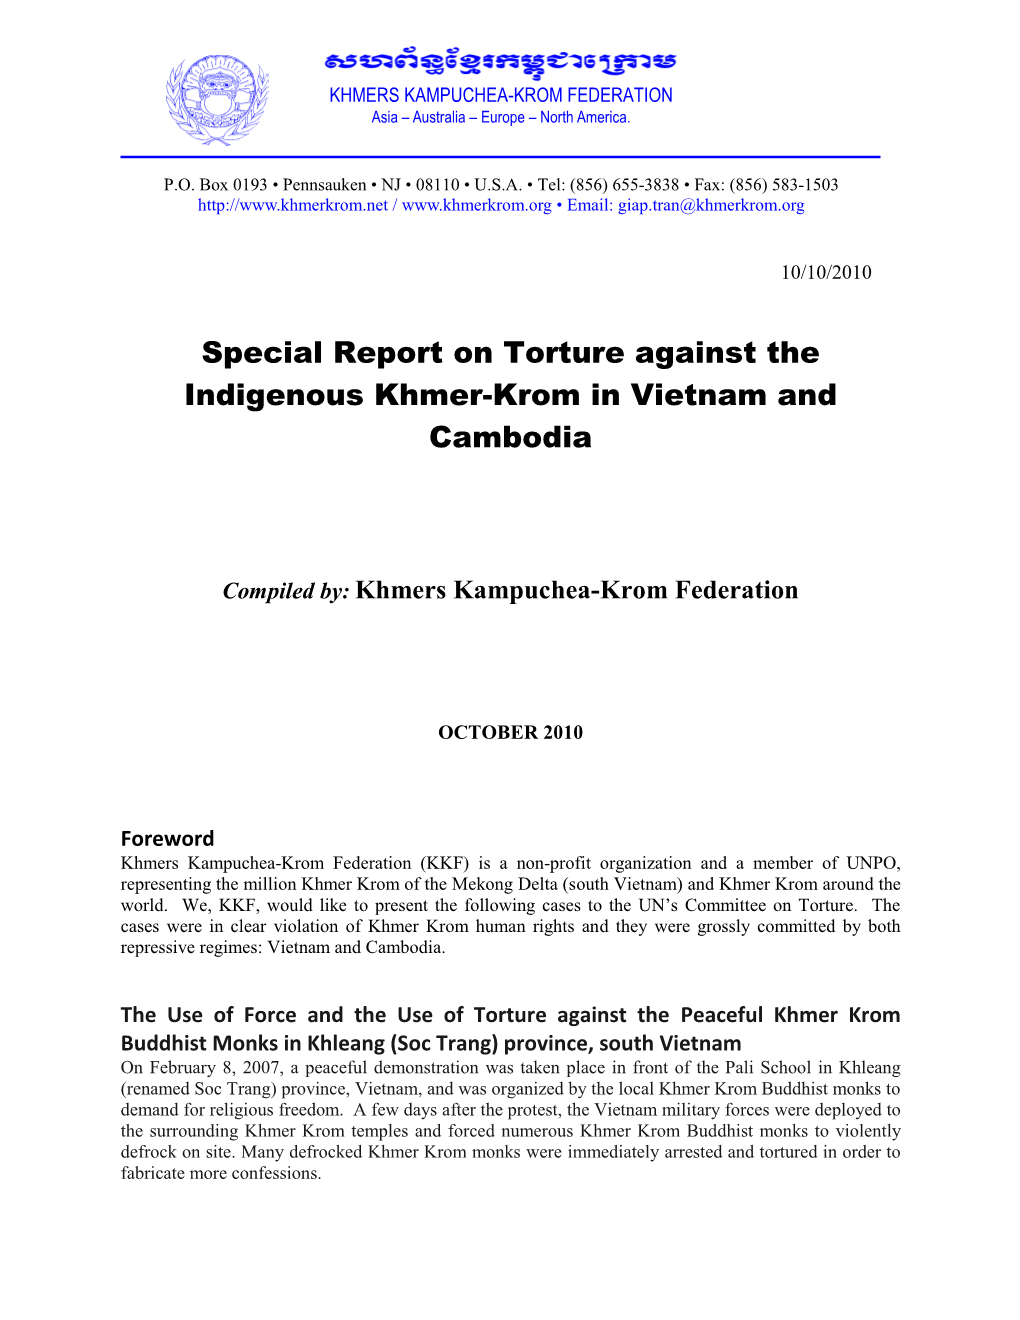 Special Report on Torture Against the Indigenous Khmer-Krom in Vietnam and Cambodia